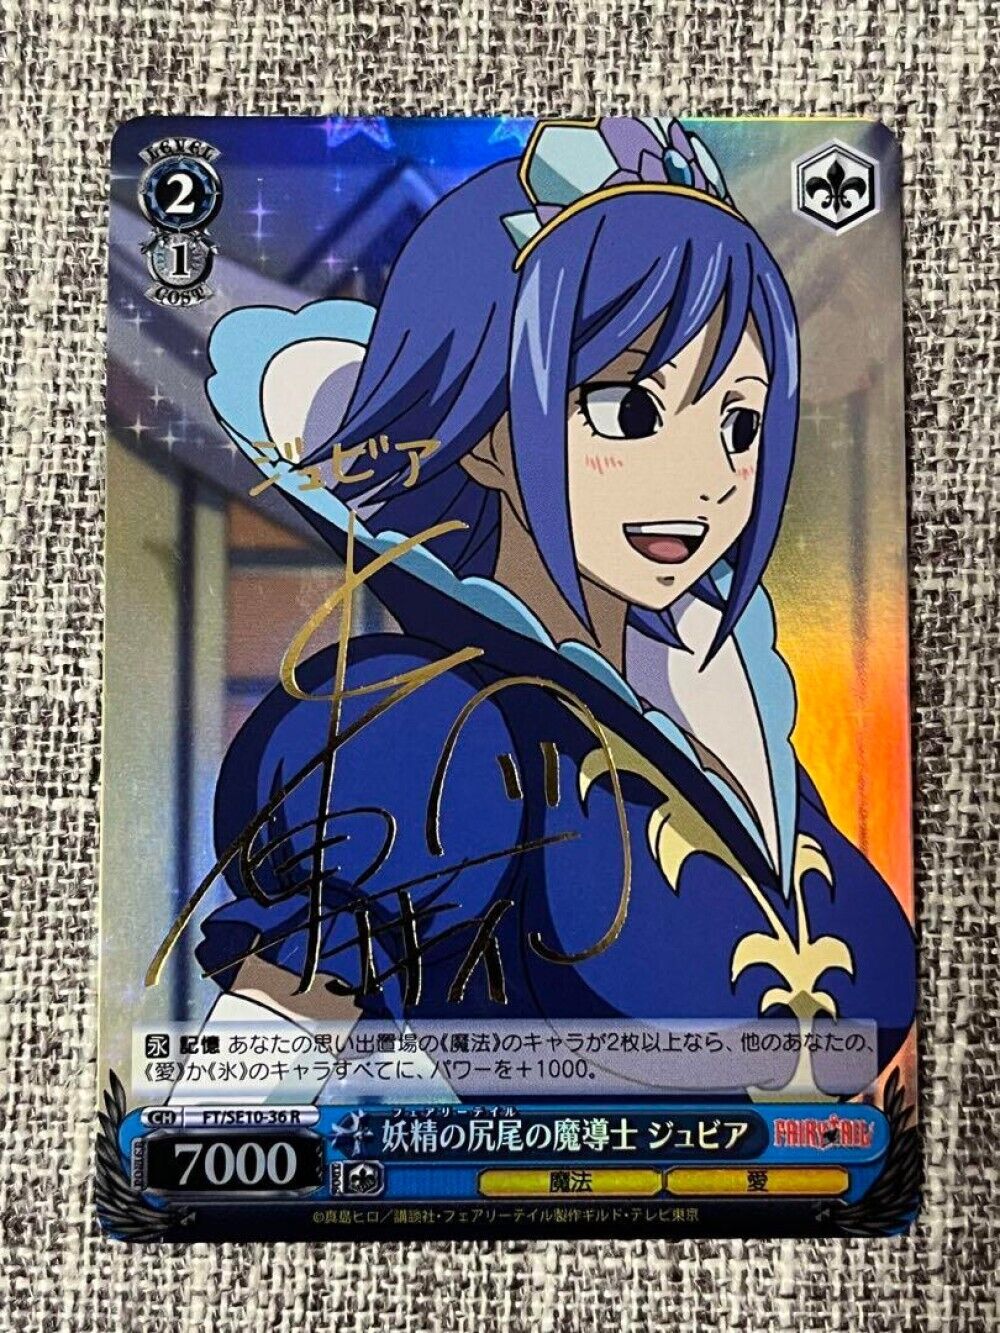 Vice WS Fairy Tail Sign SP Fairy Tail Mage Jubia